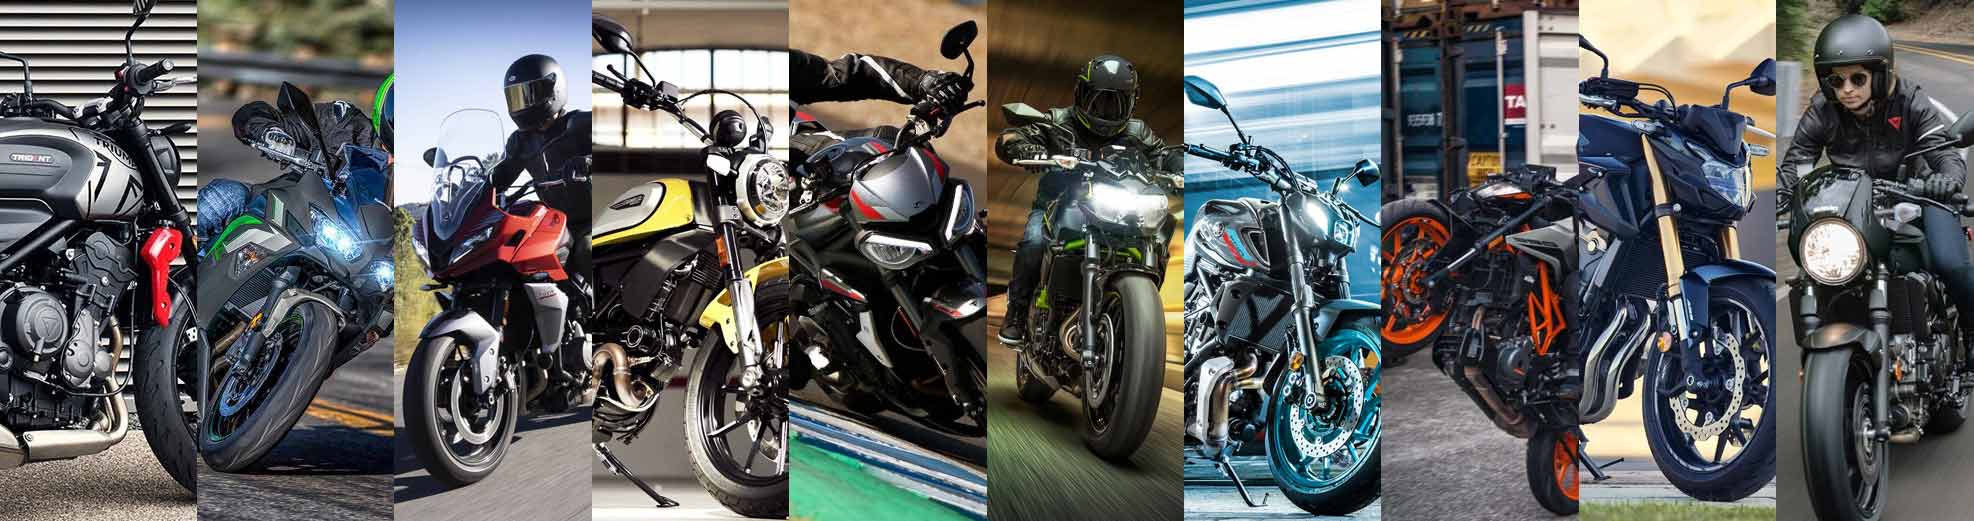 Top 10 First Bikes to buy - banner